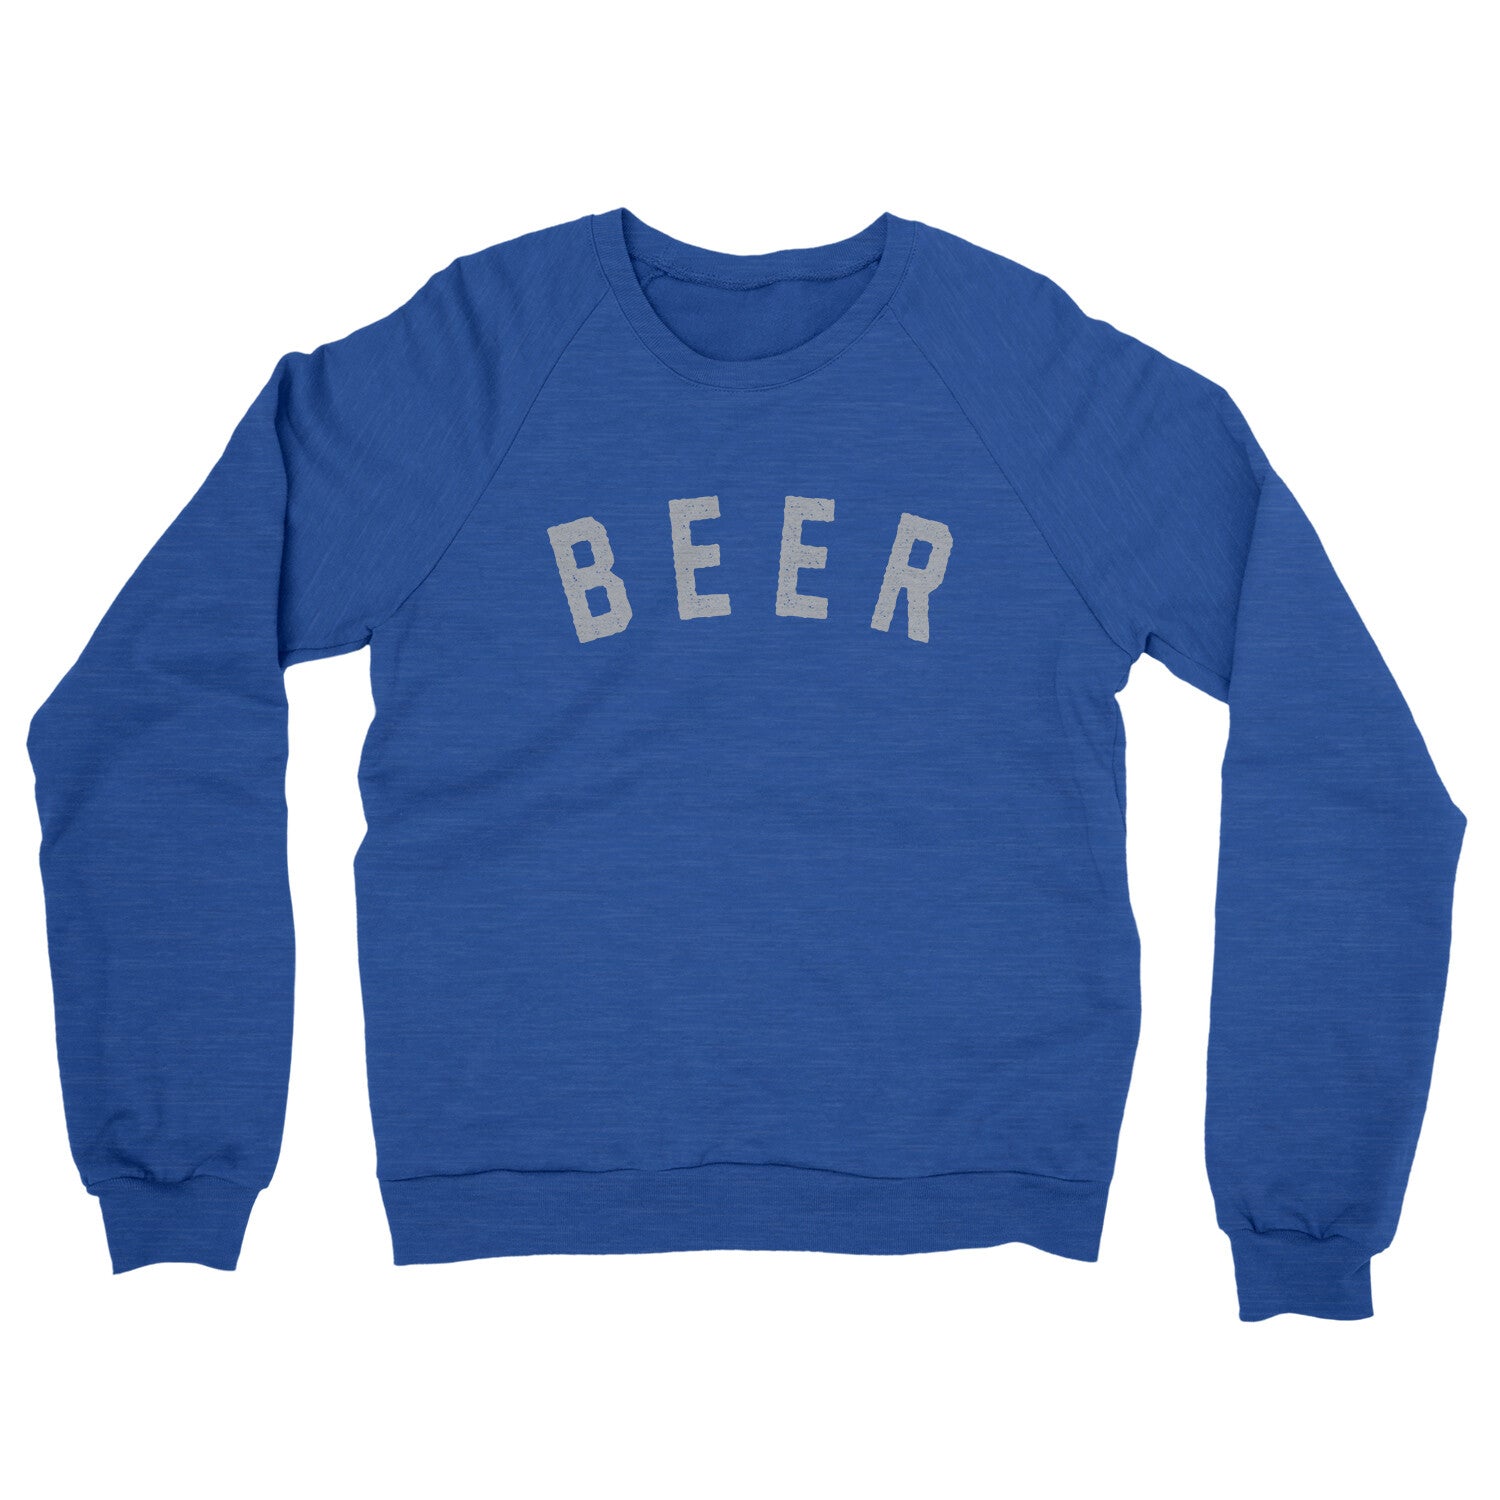 Beer in Heather Royal Color